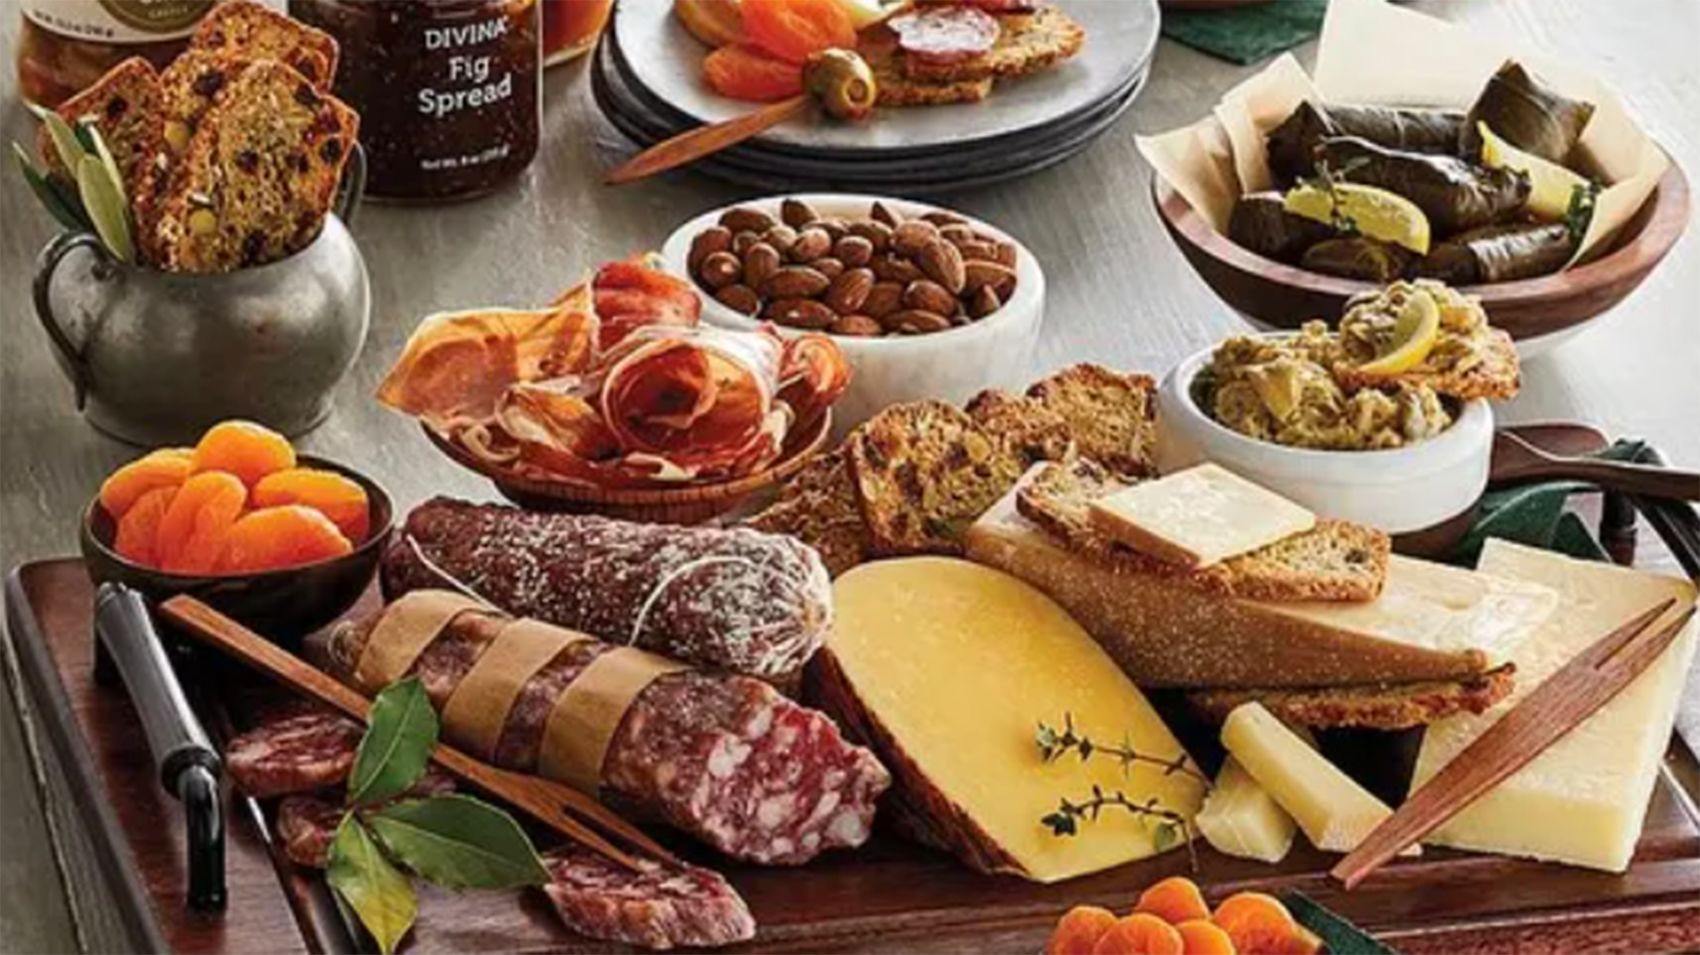 https://media.cnn.com/api/v1/images/stellar/prod/211104133857-foodie-classic-epicurean-charcuterie-and-cheese-collection.jpg?q=w_1700,h_955,x_0,y_0,c_fill